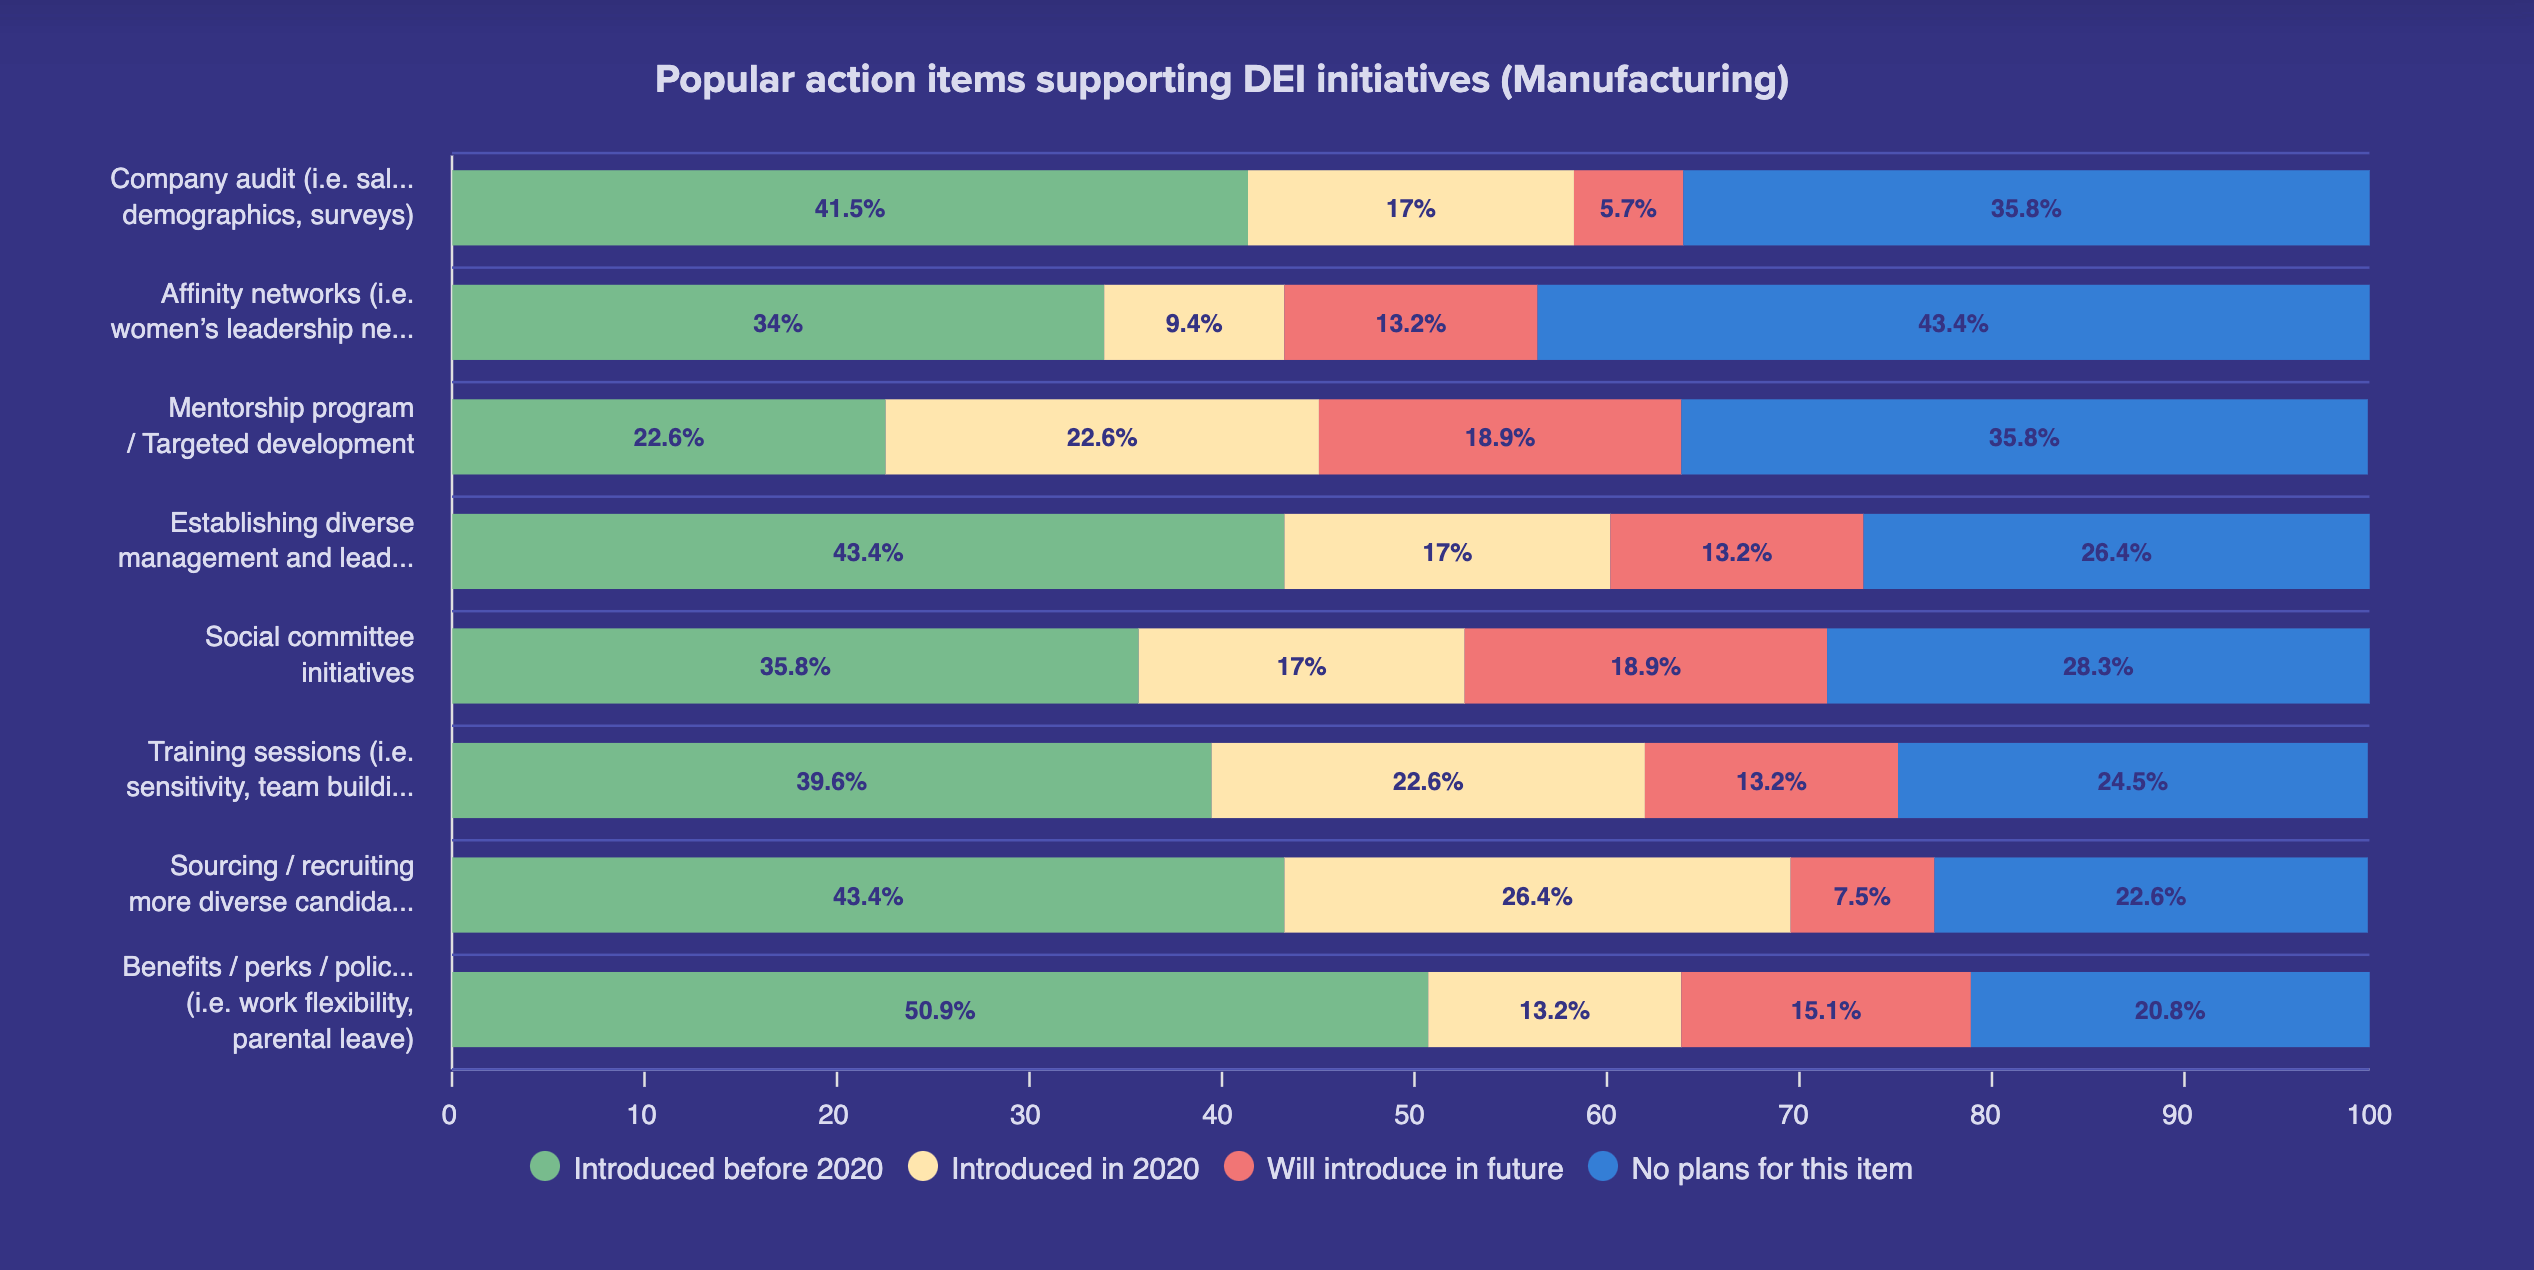 Popular action items supporting DEI initiatives (Manufacturing)